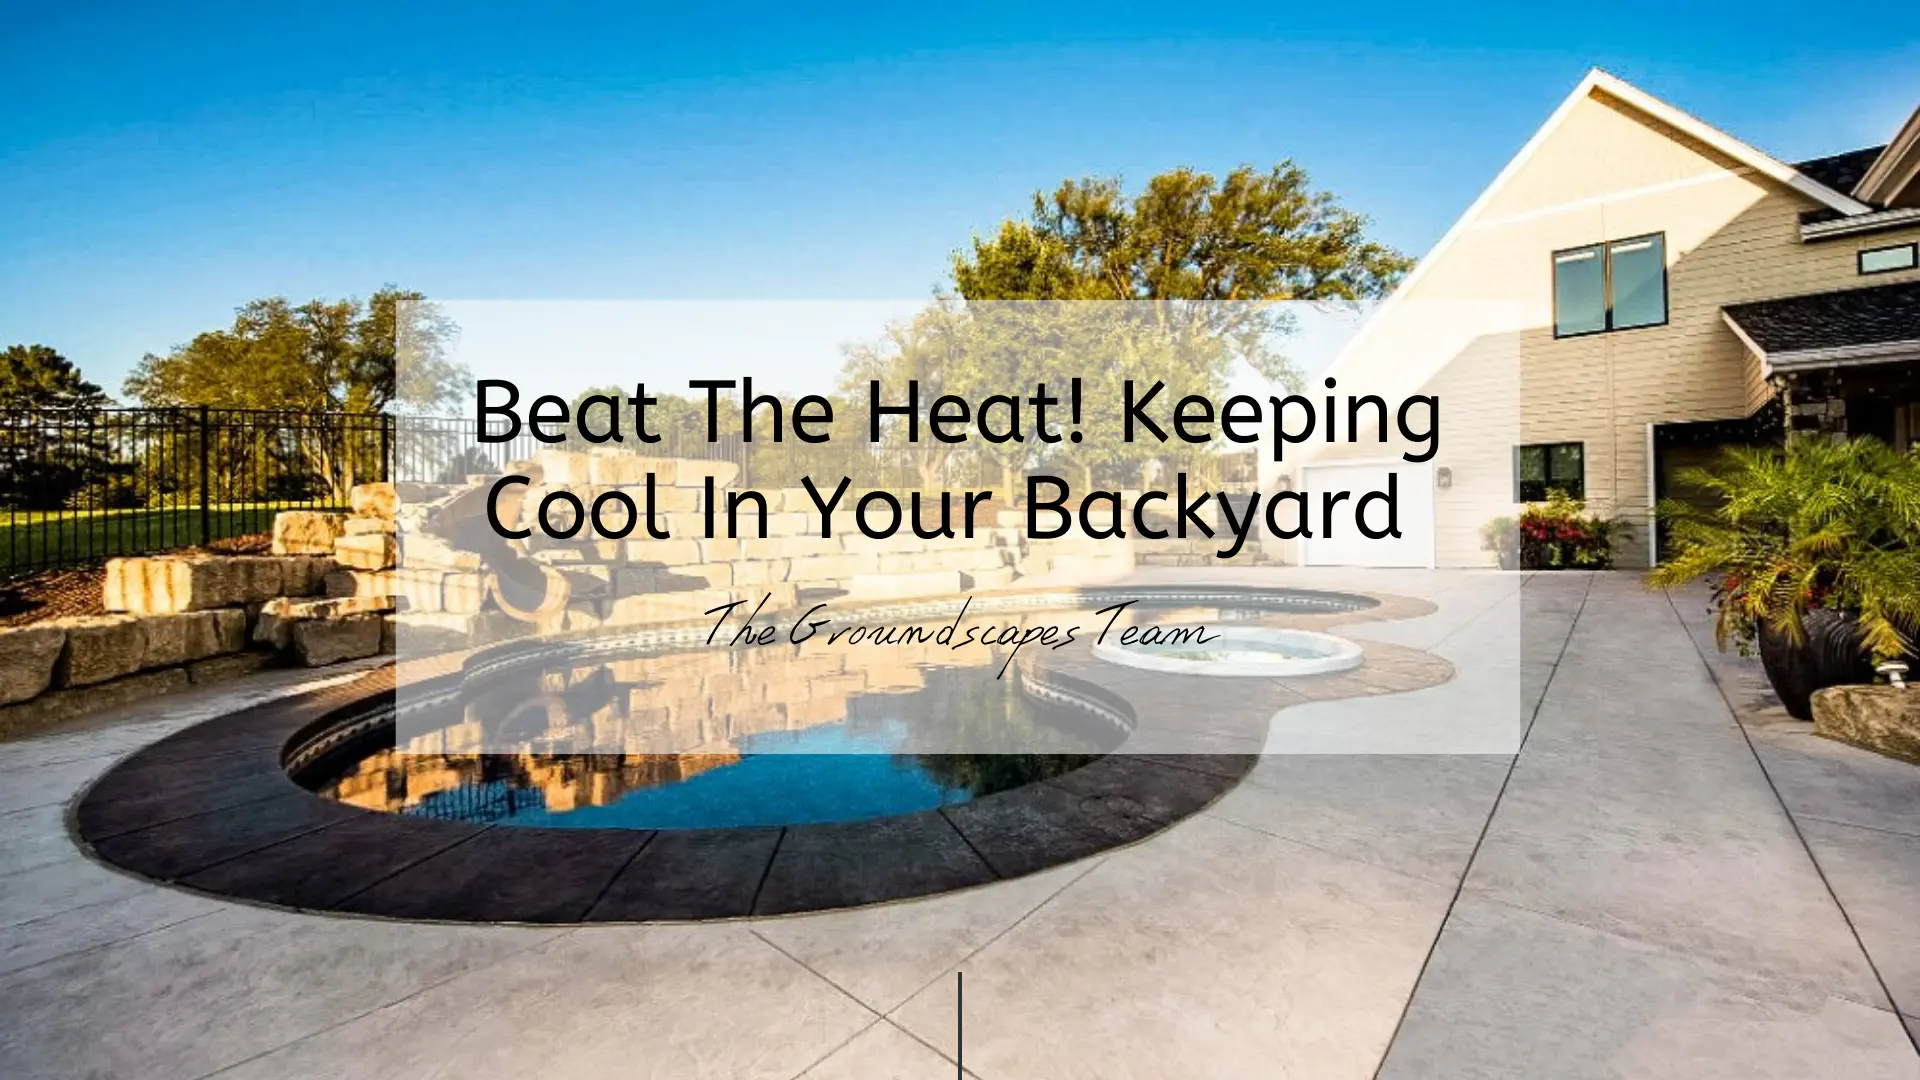 Beat The Heat! Keeping Cool In Your Backyard